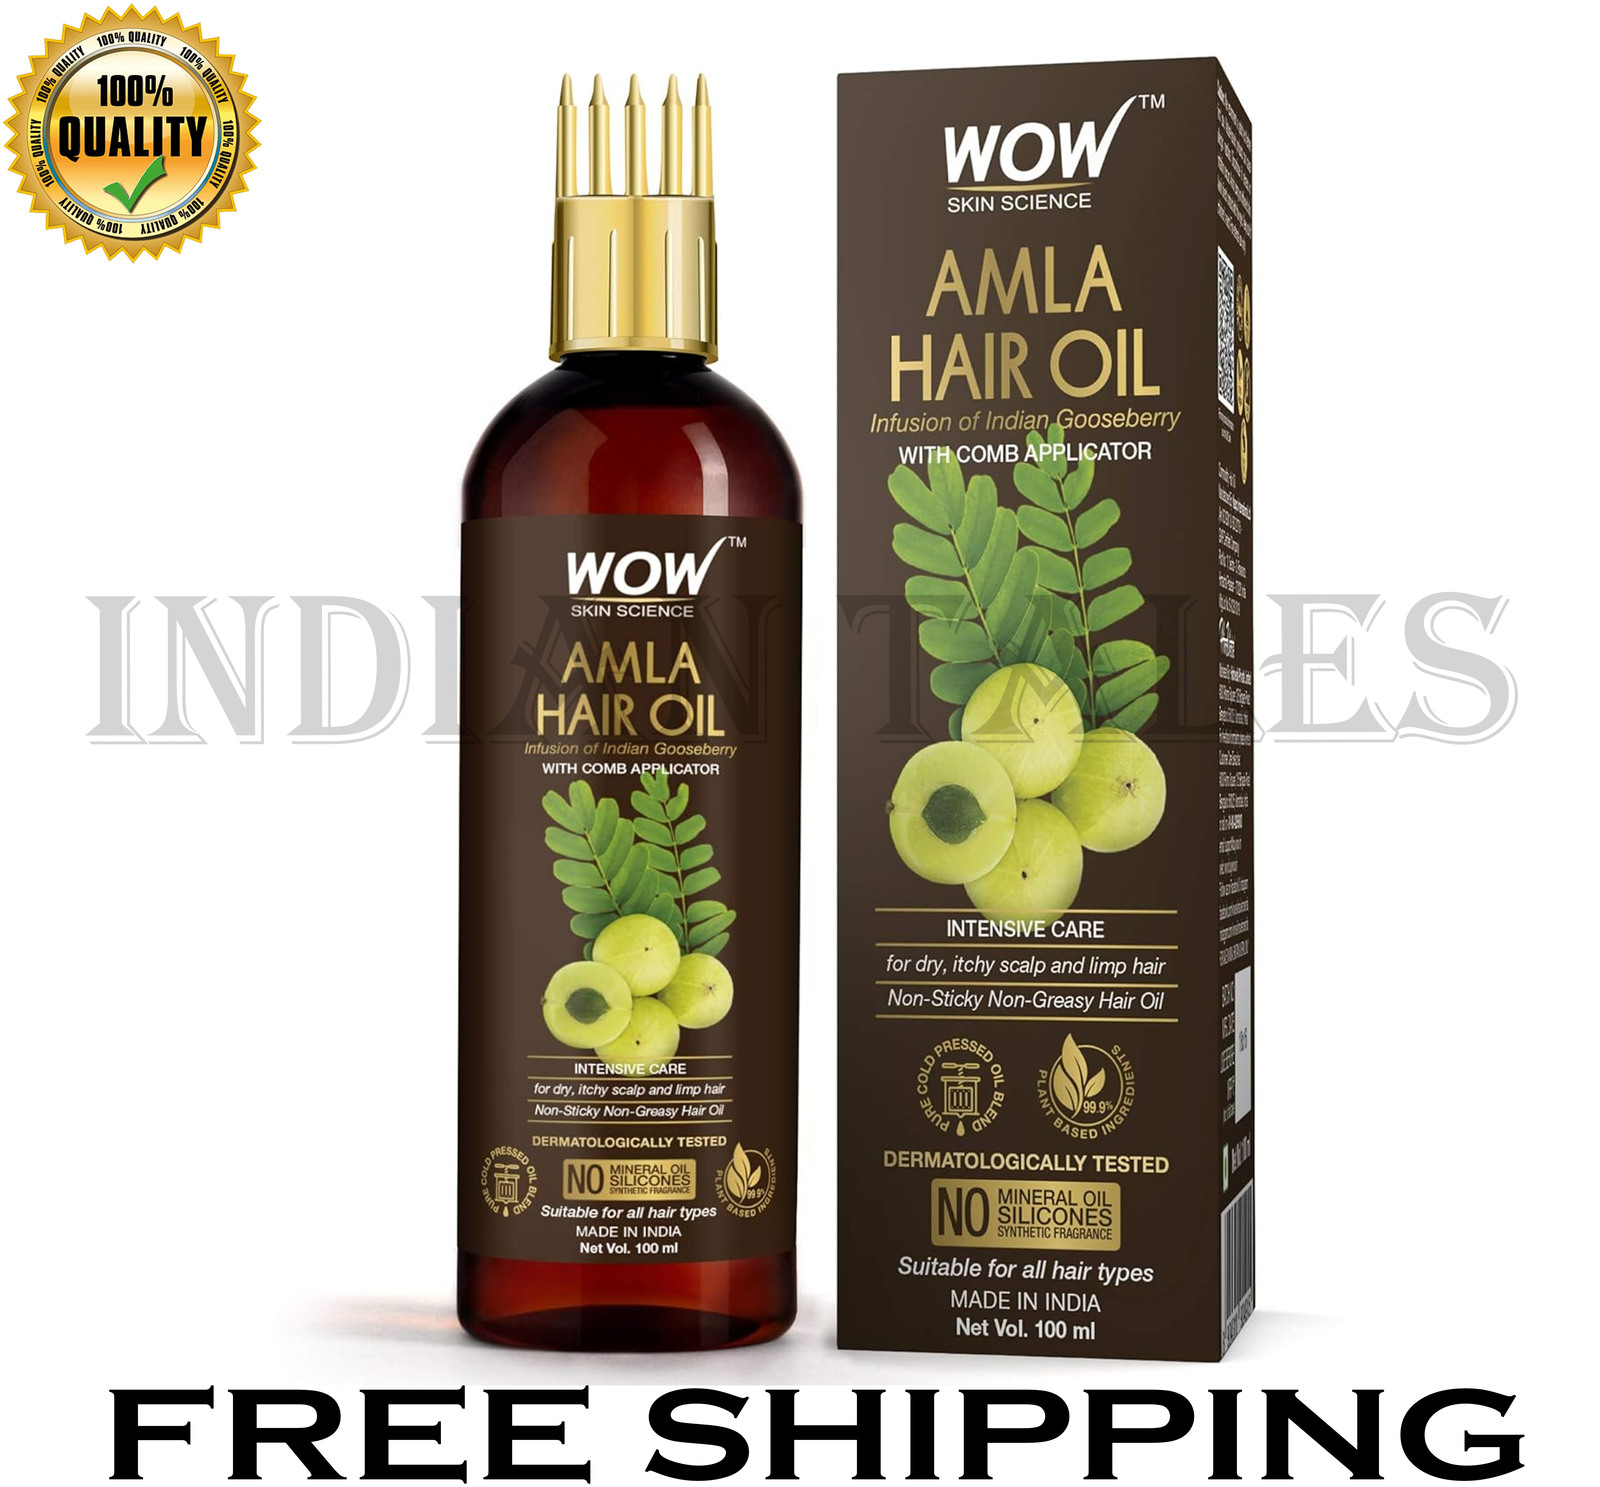 WOW Skin Science Amla Hair Oil Pure Cold Pressed Indian Gooseberry 100ml - $22.99